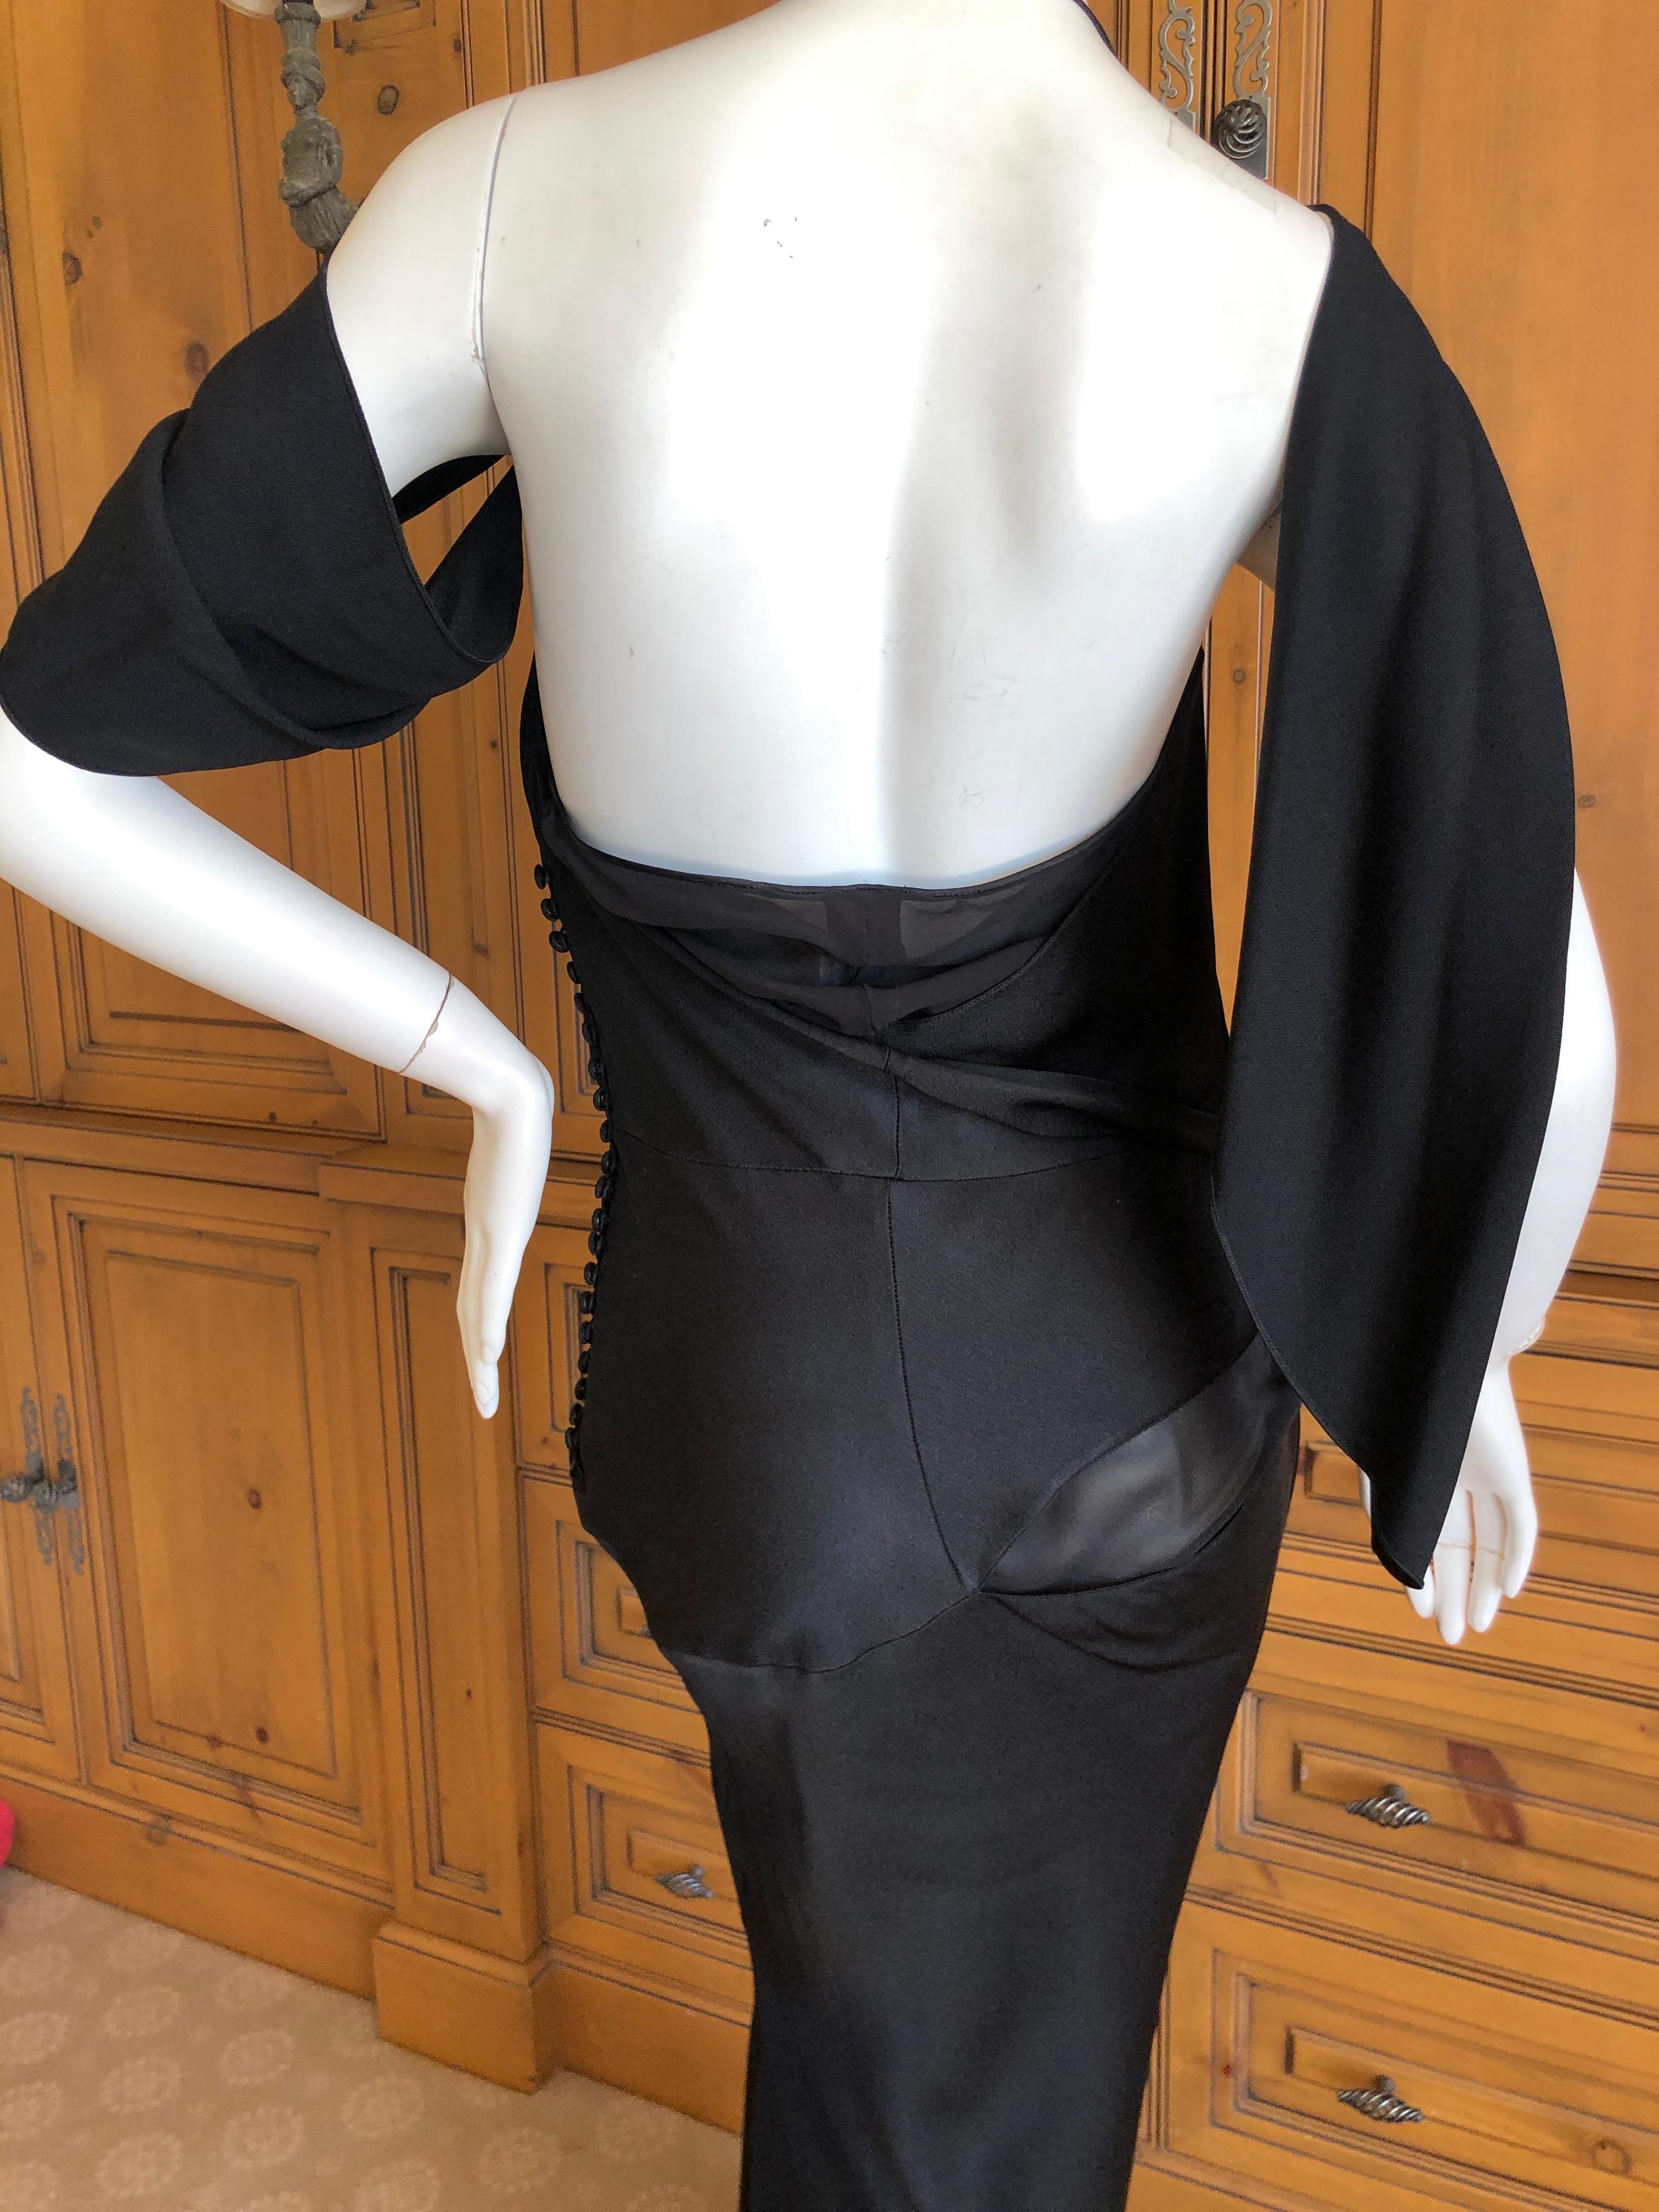 John Galliano Spring 2000 Black Bias Cut Evening Dress with Sheer Inserts Sz 42 For Sale 6